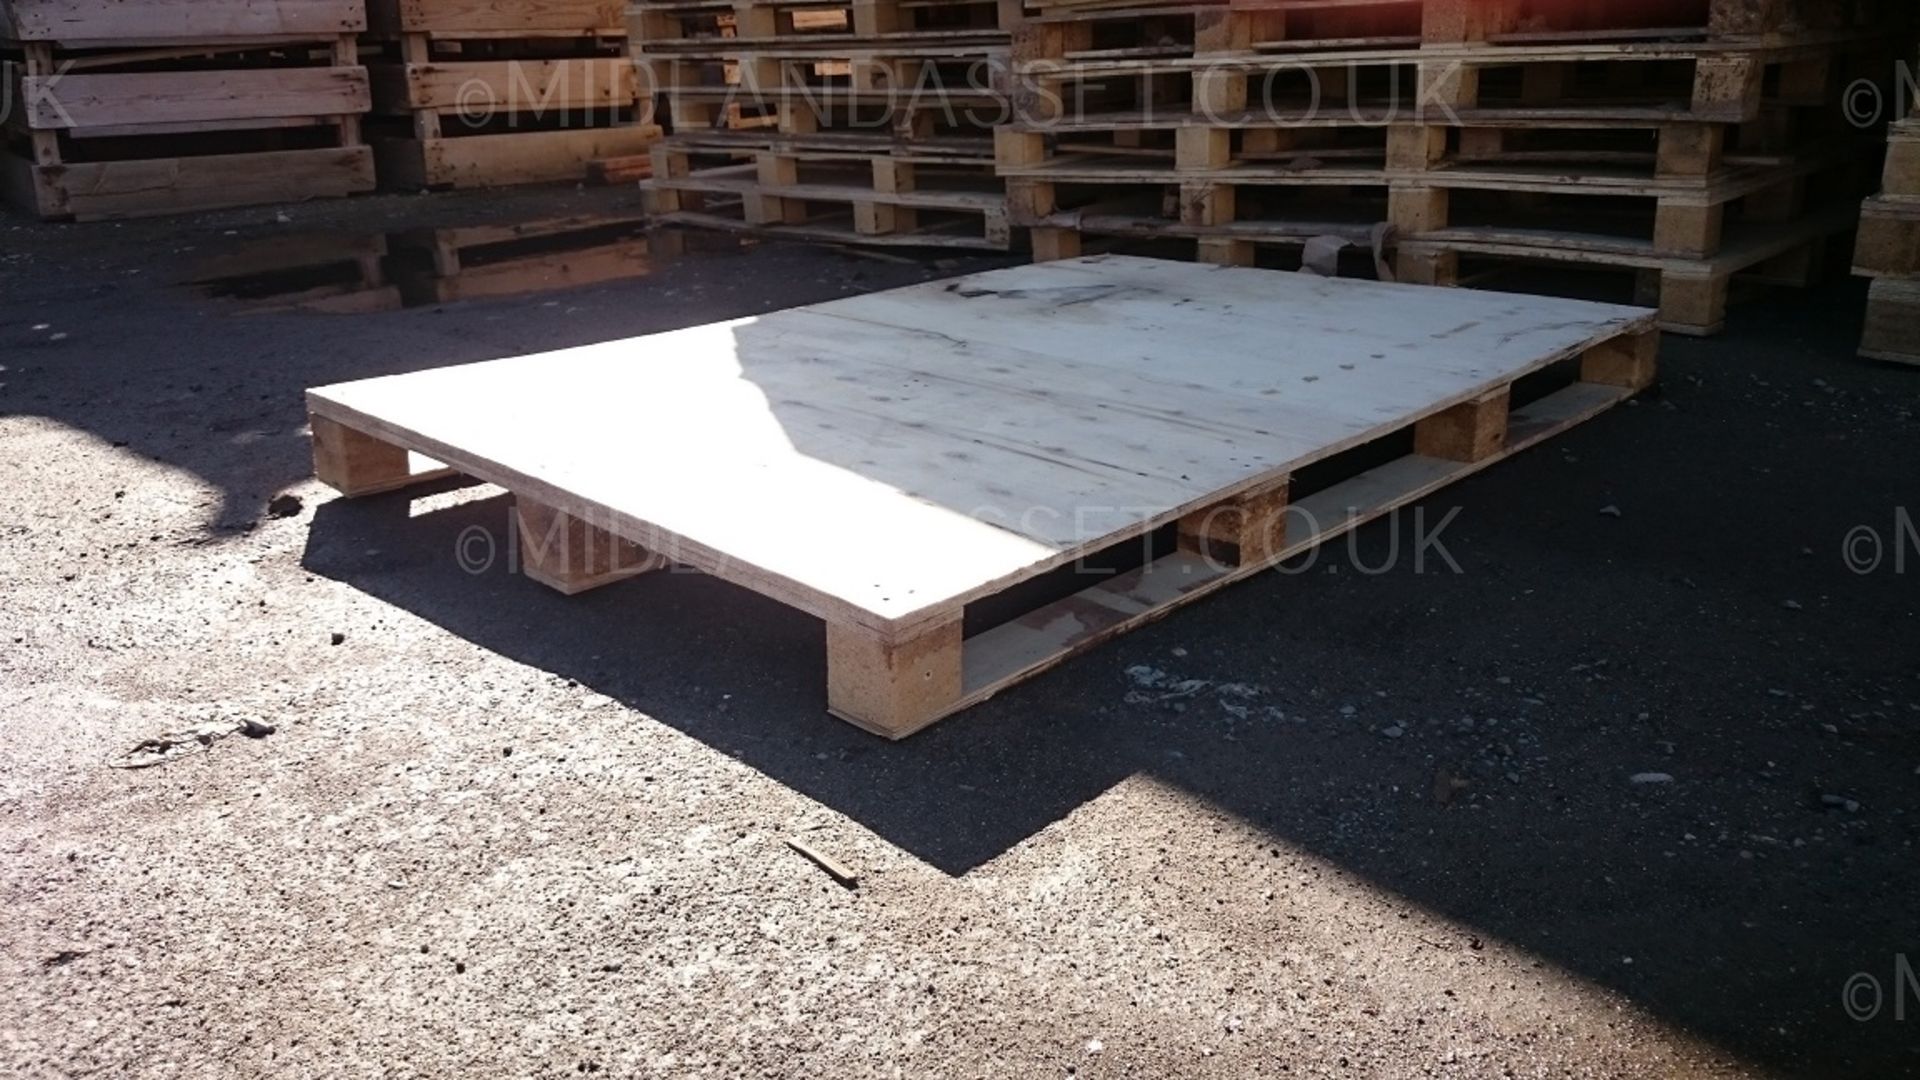 PLY TOP PALLETS IN PACKS OF 10